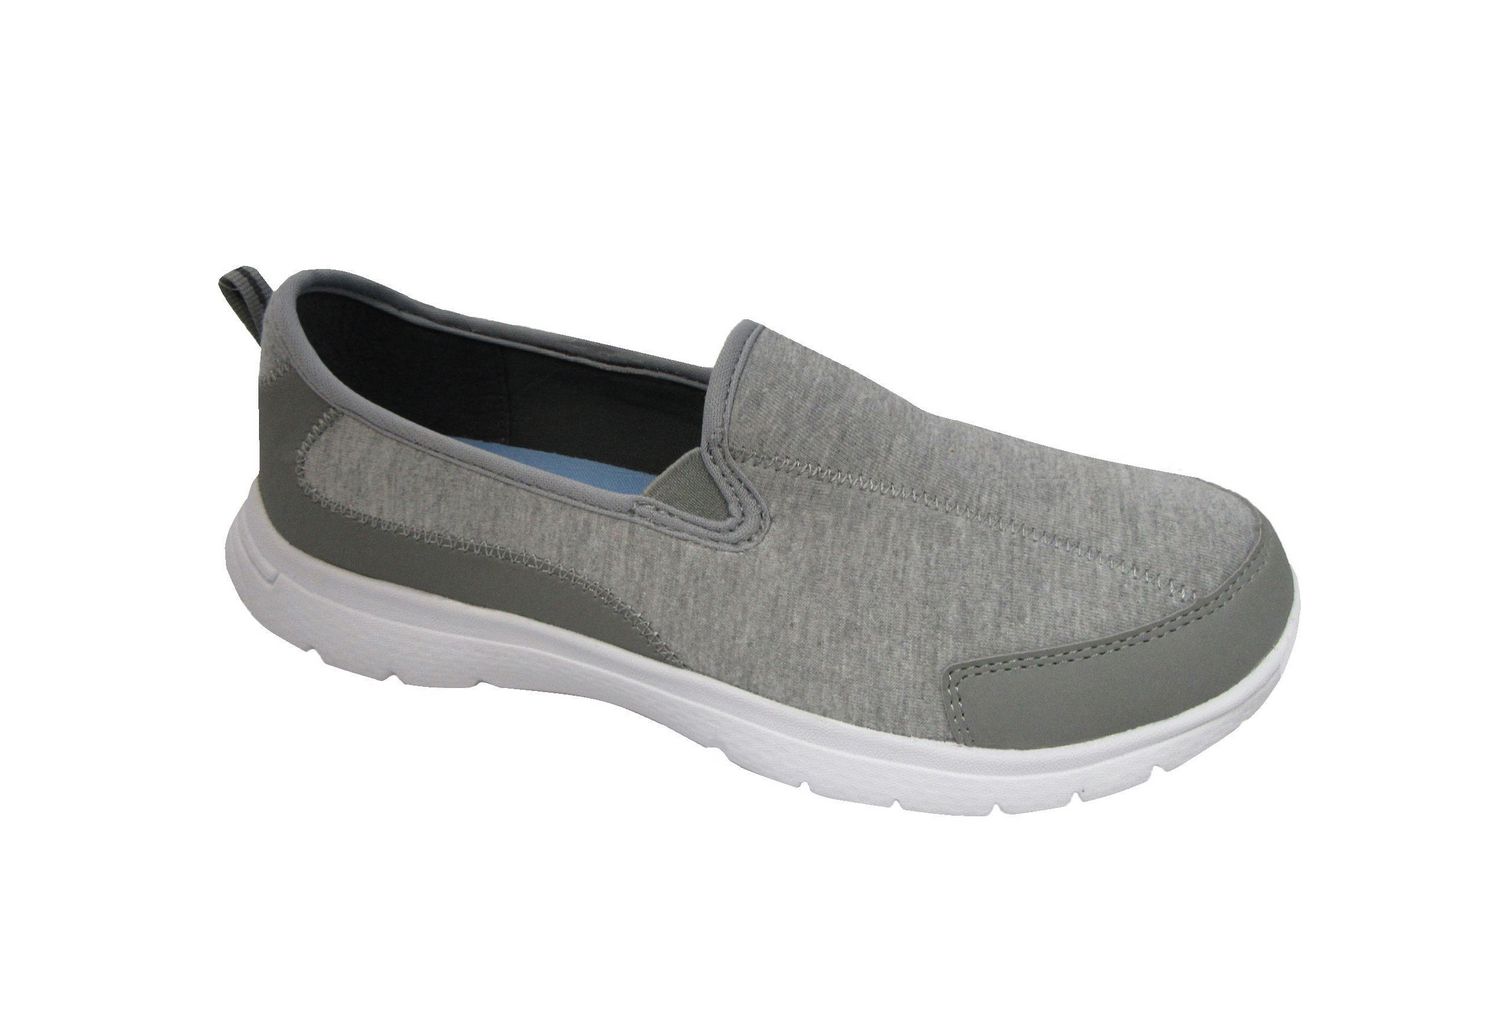 Athletic Works Women's Variety Slip On Shoes | Walmart Canada